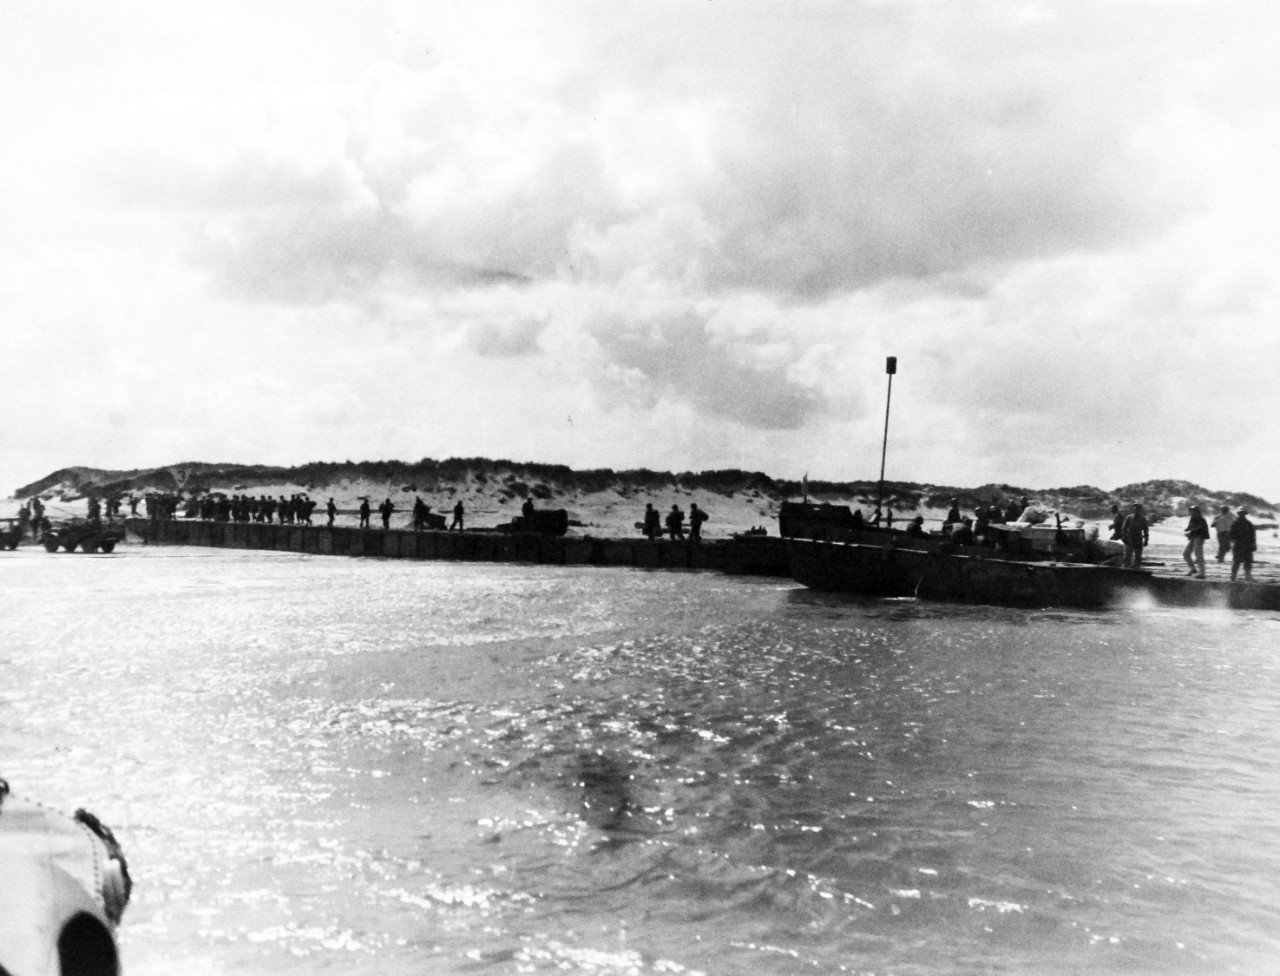 80-G-285126:  Normandy Invasion, Mulberries, June 1944.   The pontoon causeway at “Utah” beach, forming part of the U.S. Mulberry the man-made harbor off coast of France, built to protect landing craft from storms in English Channel.   Shown:  Reinforcing troops march over causeway.  Low tide leaves some sections of the latter dry.  Photograph released November 7, 1944.  U.S. Navy photograph, now in the collections of the National Archives.  (2016/03/15).